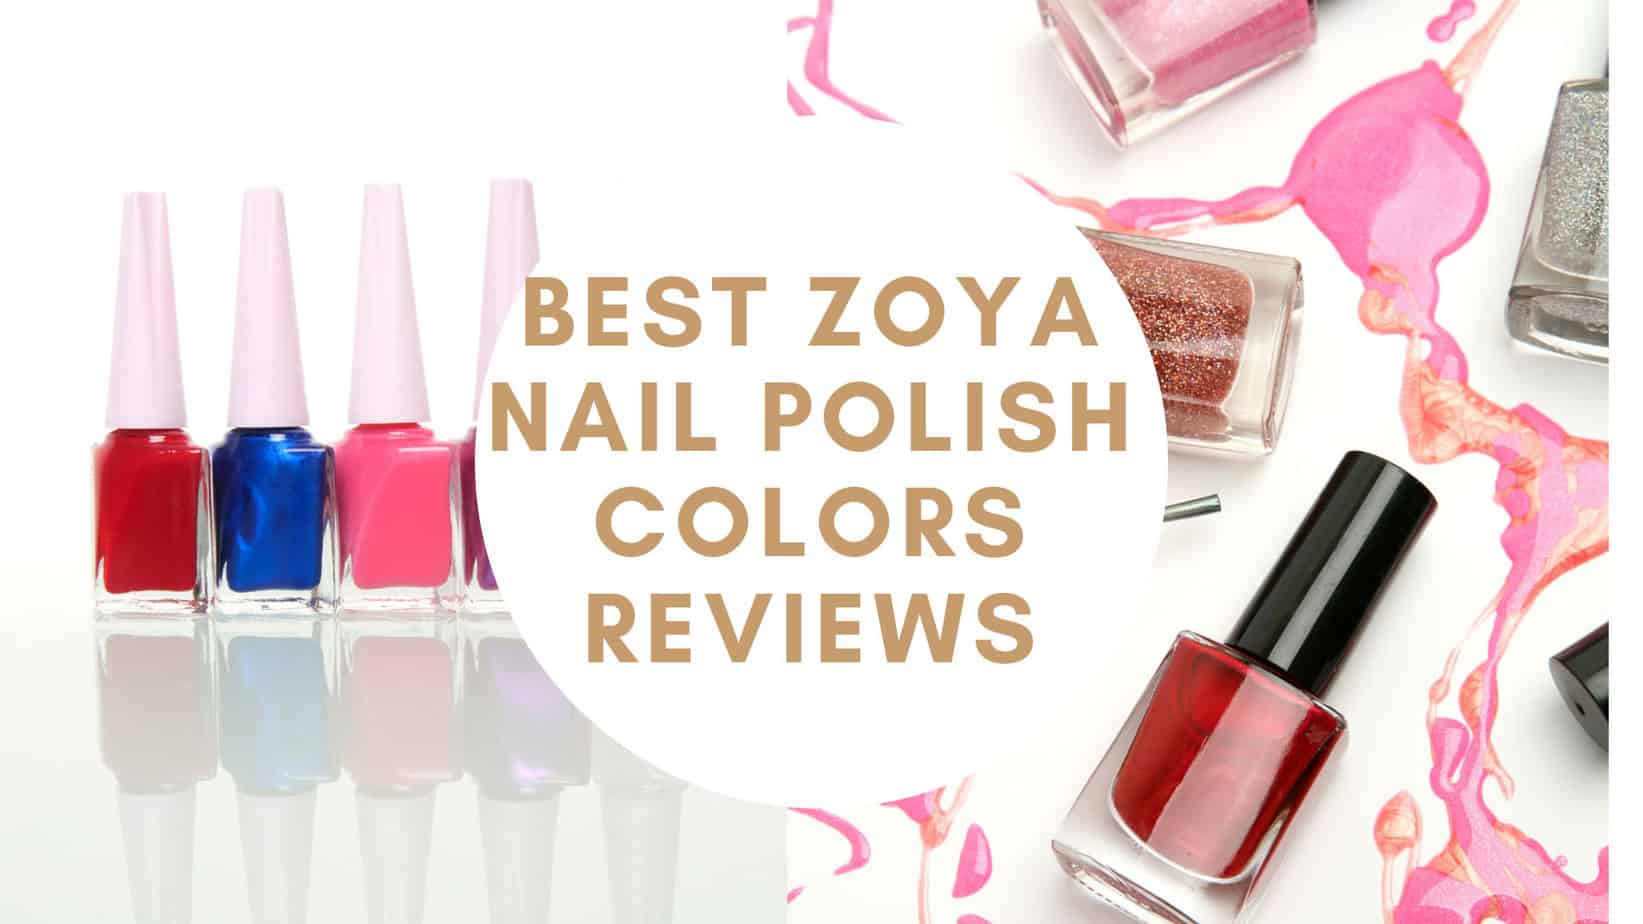 6. Zoya Nail Polish in "Illusion Collection" - wide 8